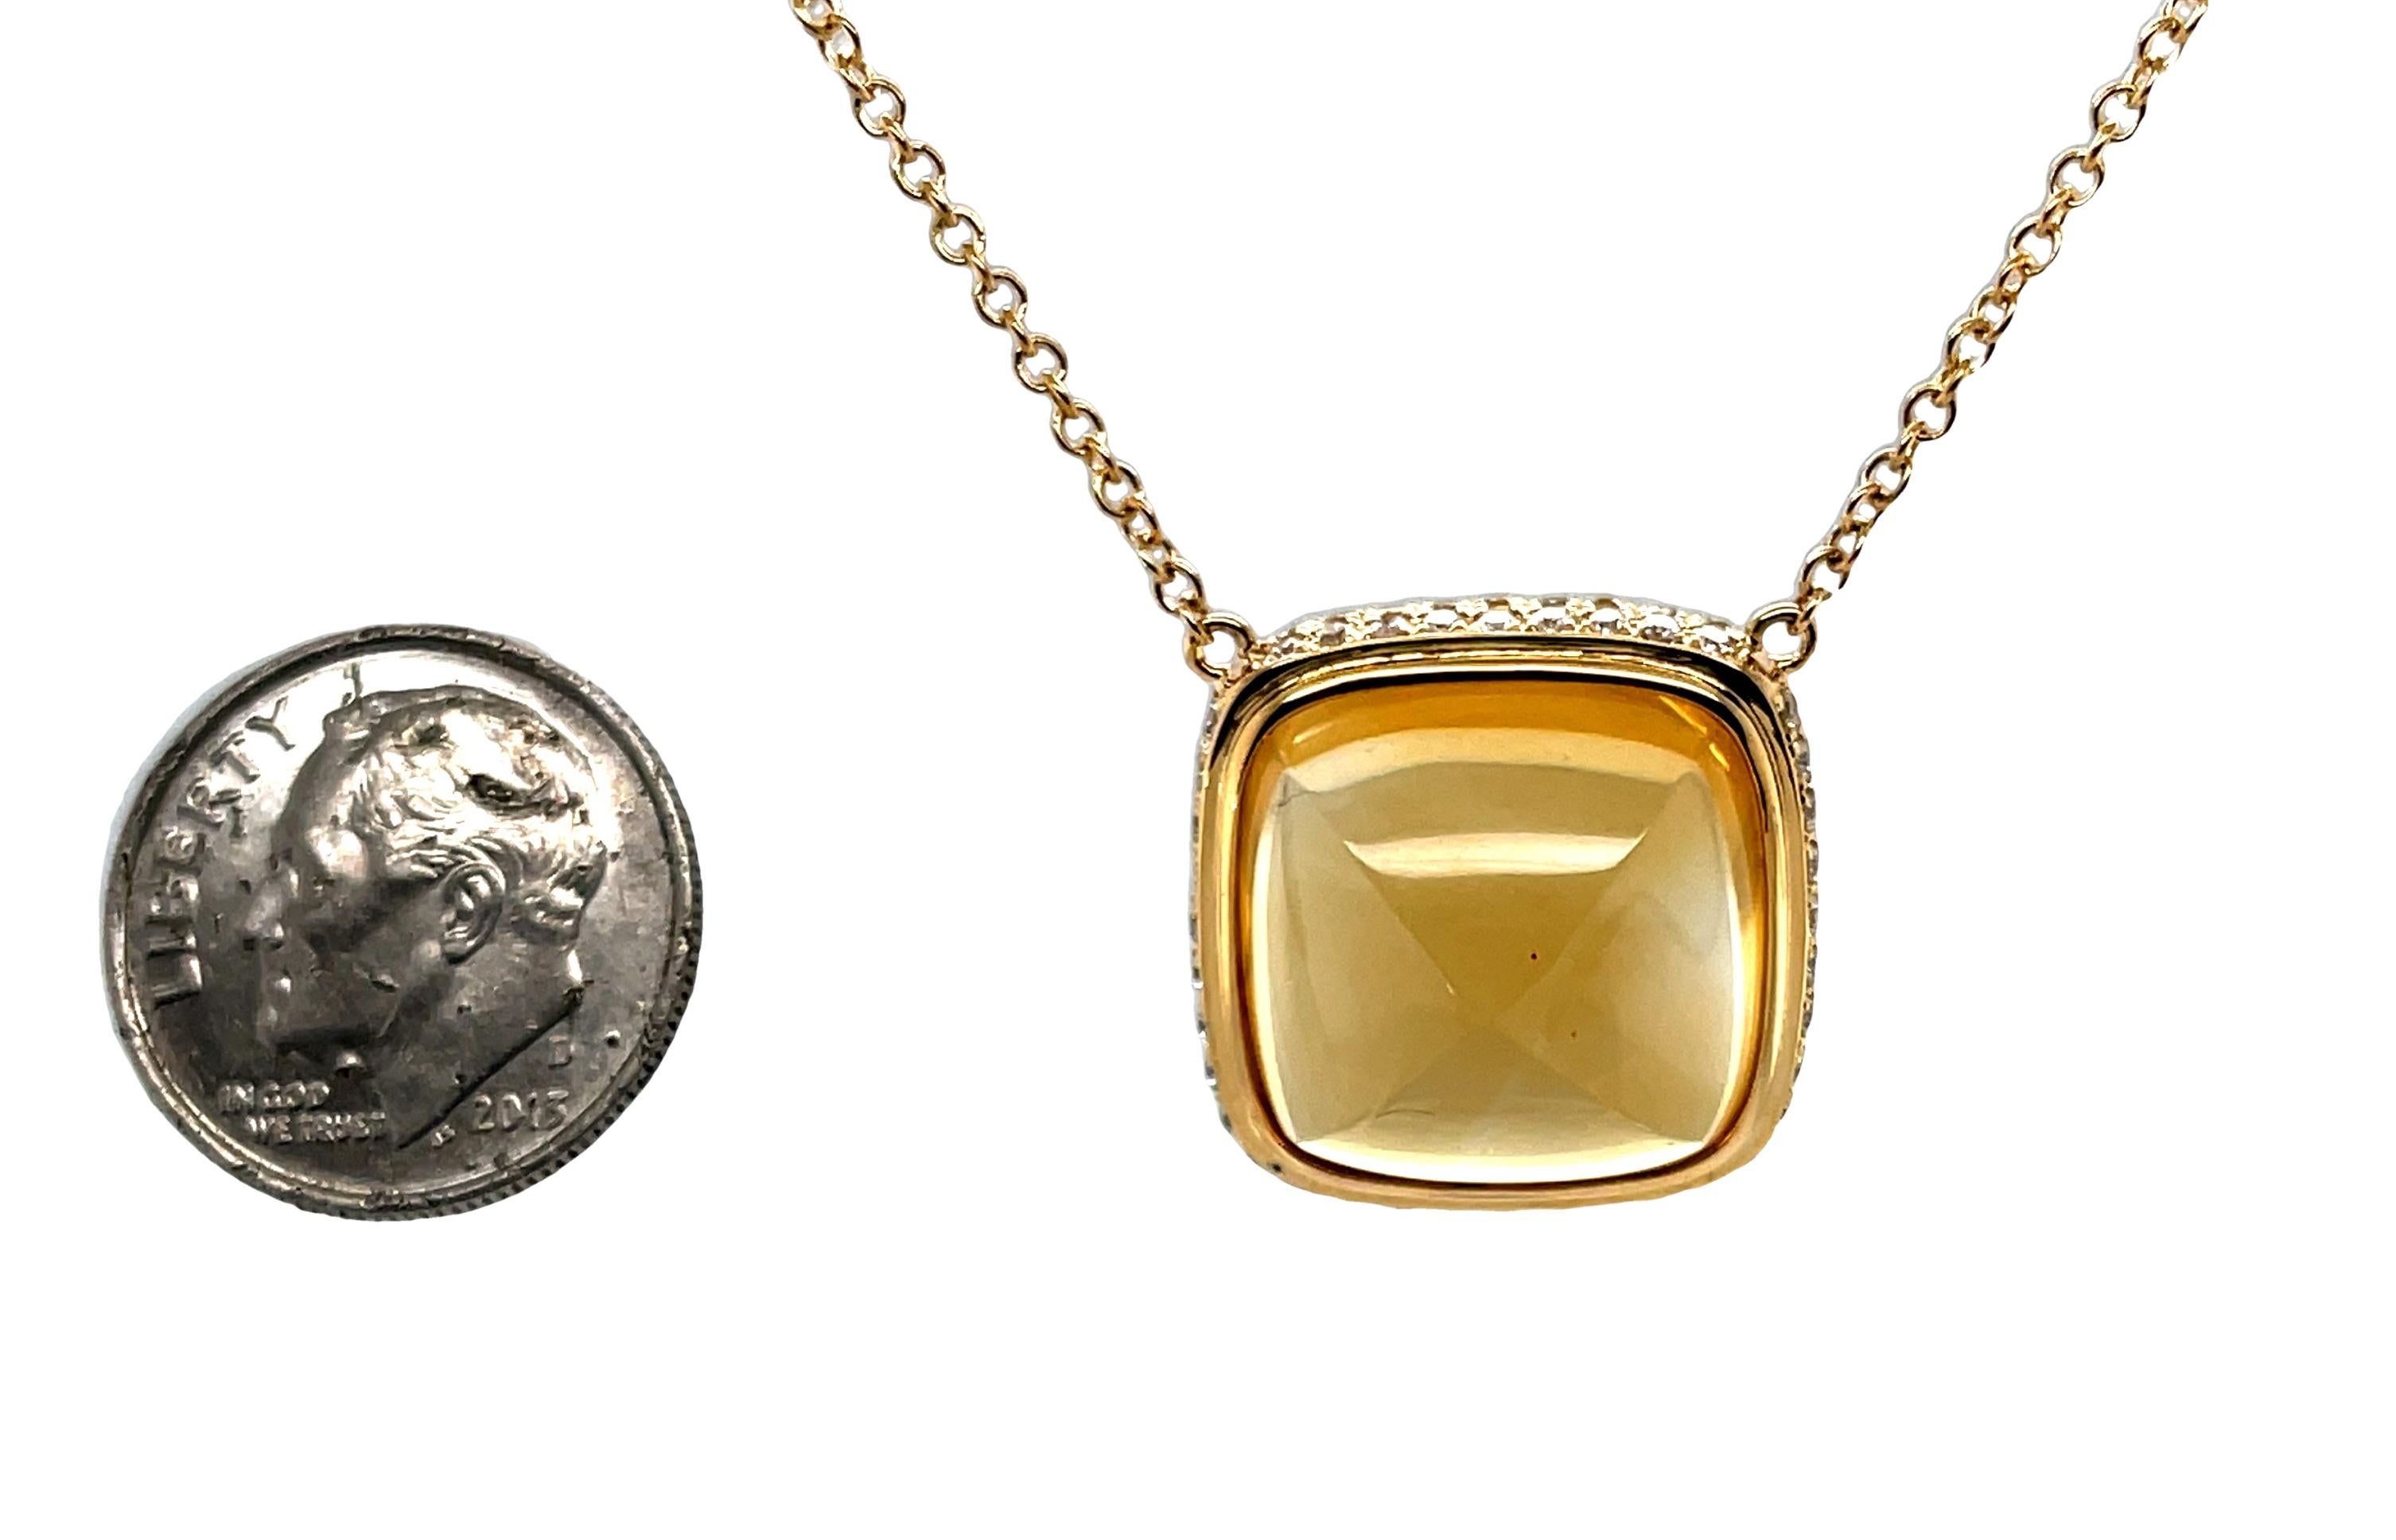 Sugarloaf Cabochon 16.79 Carat Citrine Cabochon, Yellow Sapphire and Diamond Necklace  For Sale